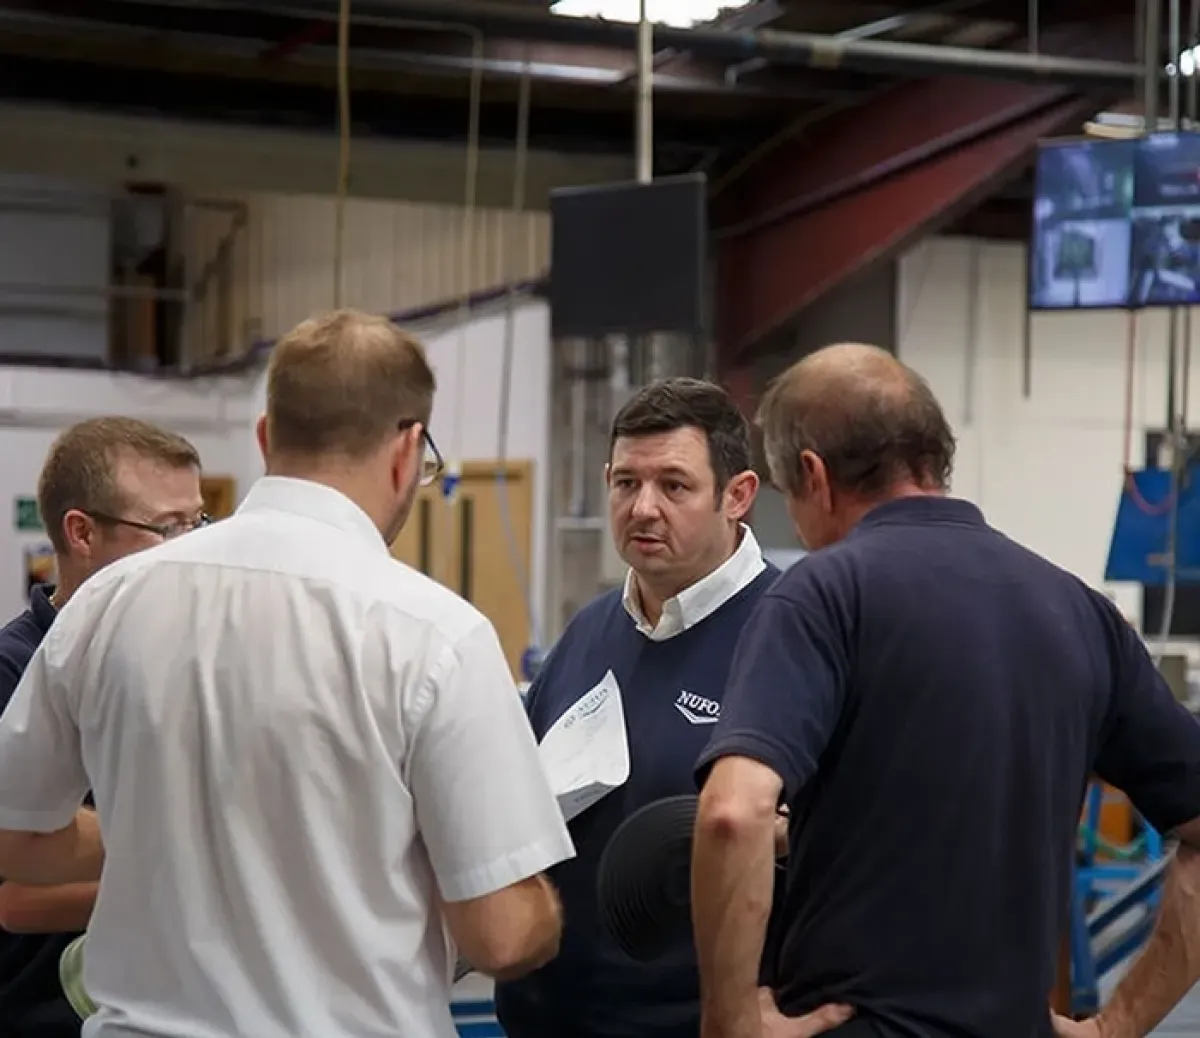 About Nufox Rubber, Manchester, UK - The Nufox Rubber Team in the Plant